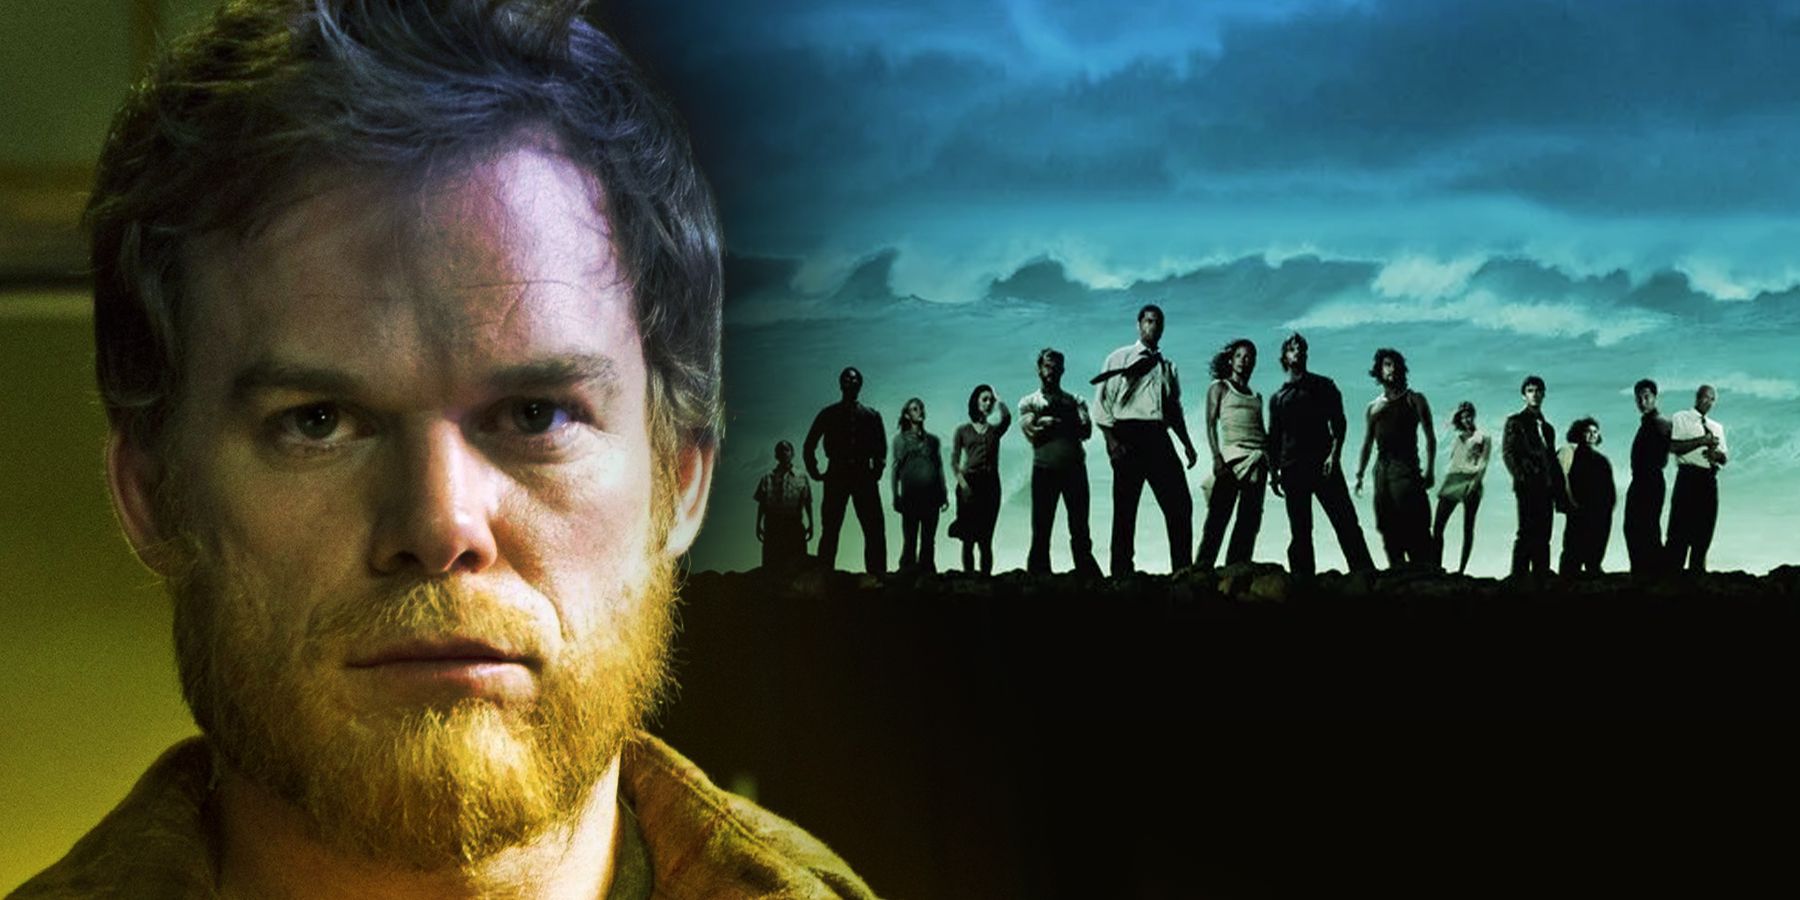 On the left, Dexter from film 'Dexter' stares. On the right, characters from 'Lost' are seen from a distance silhouetted in front of a raging ocean.